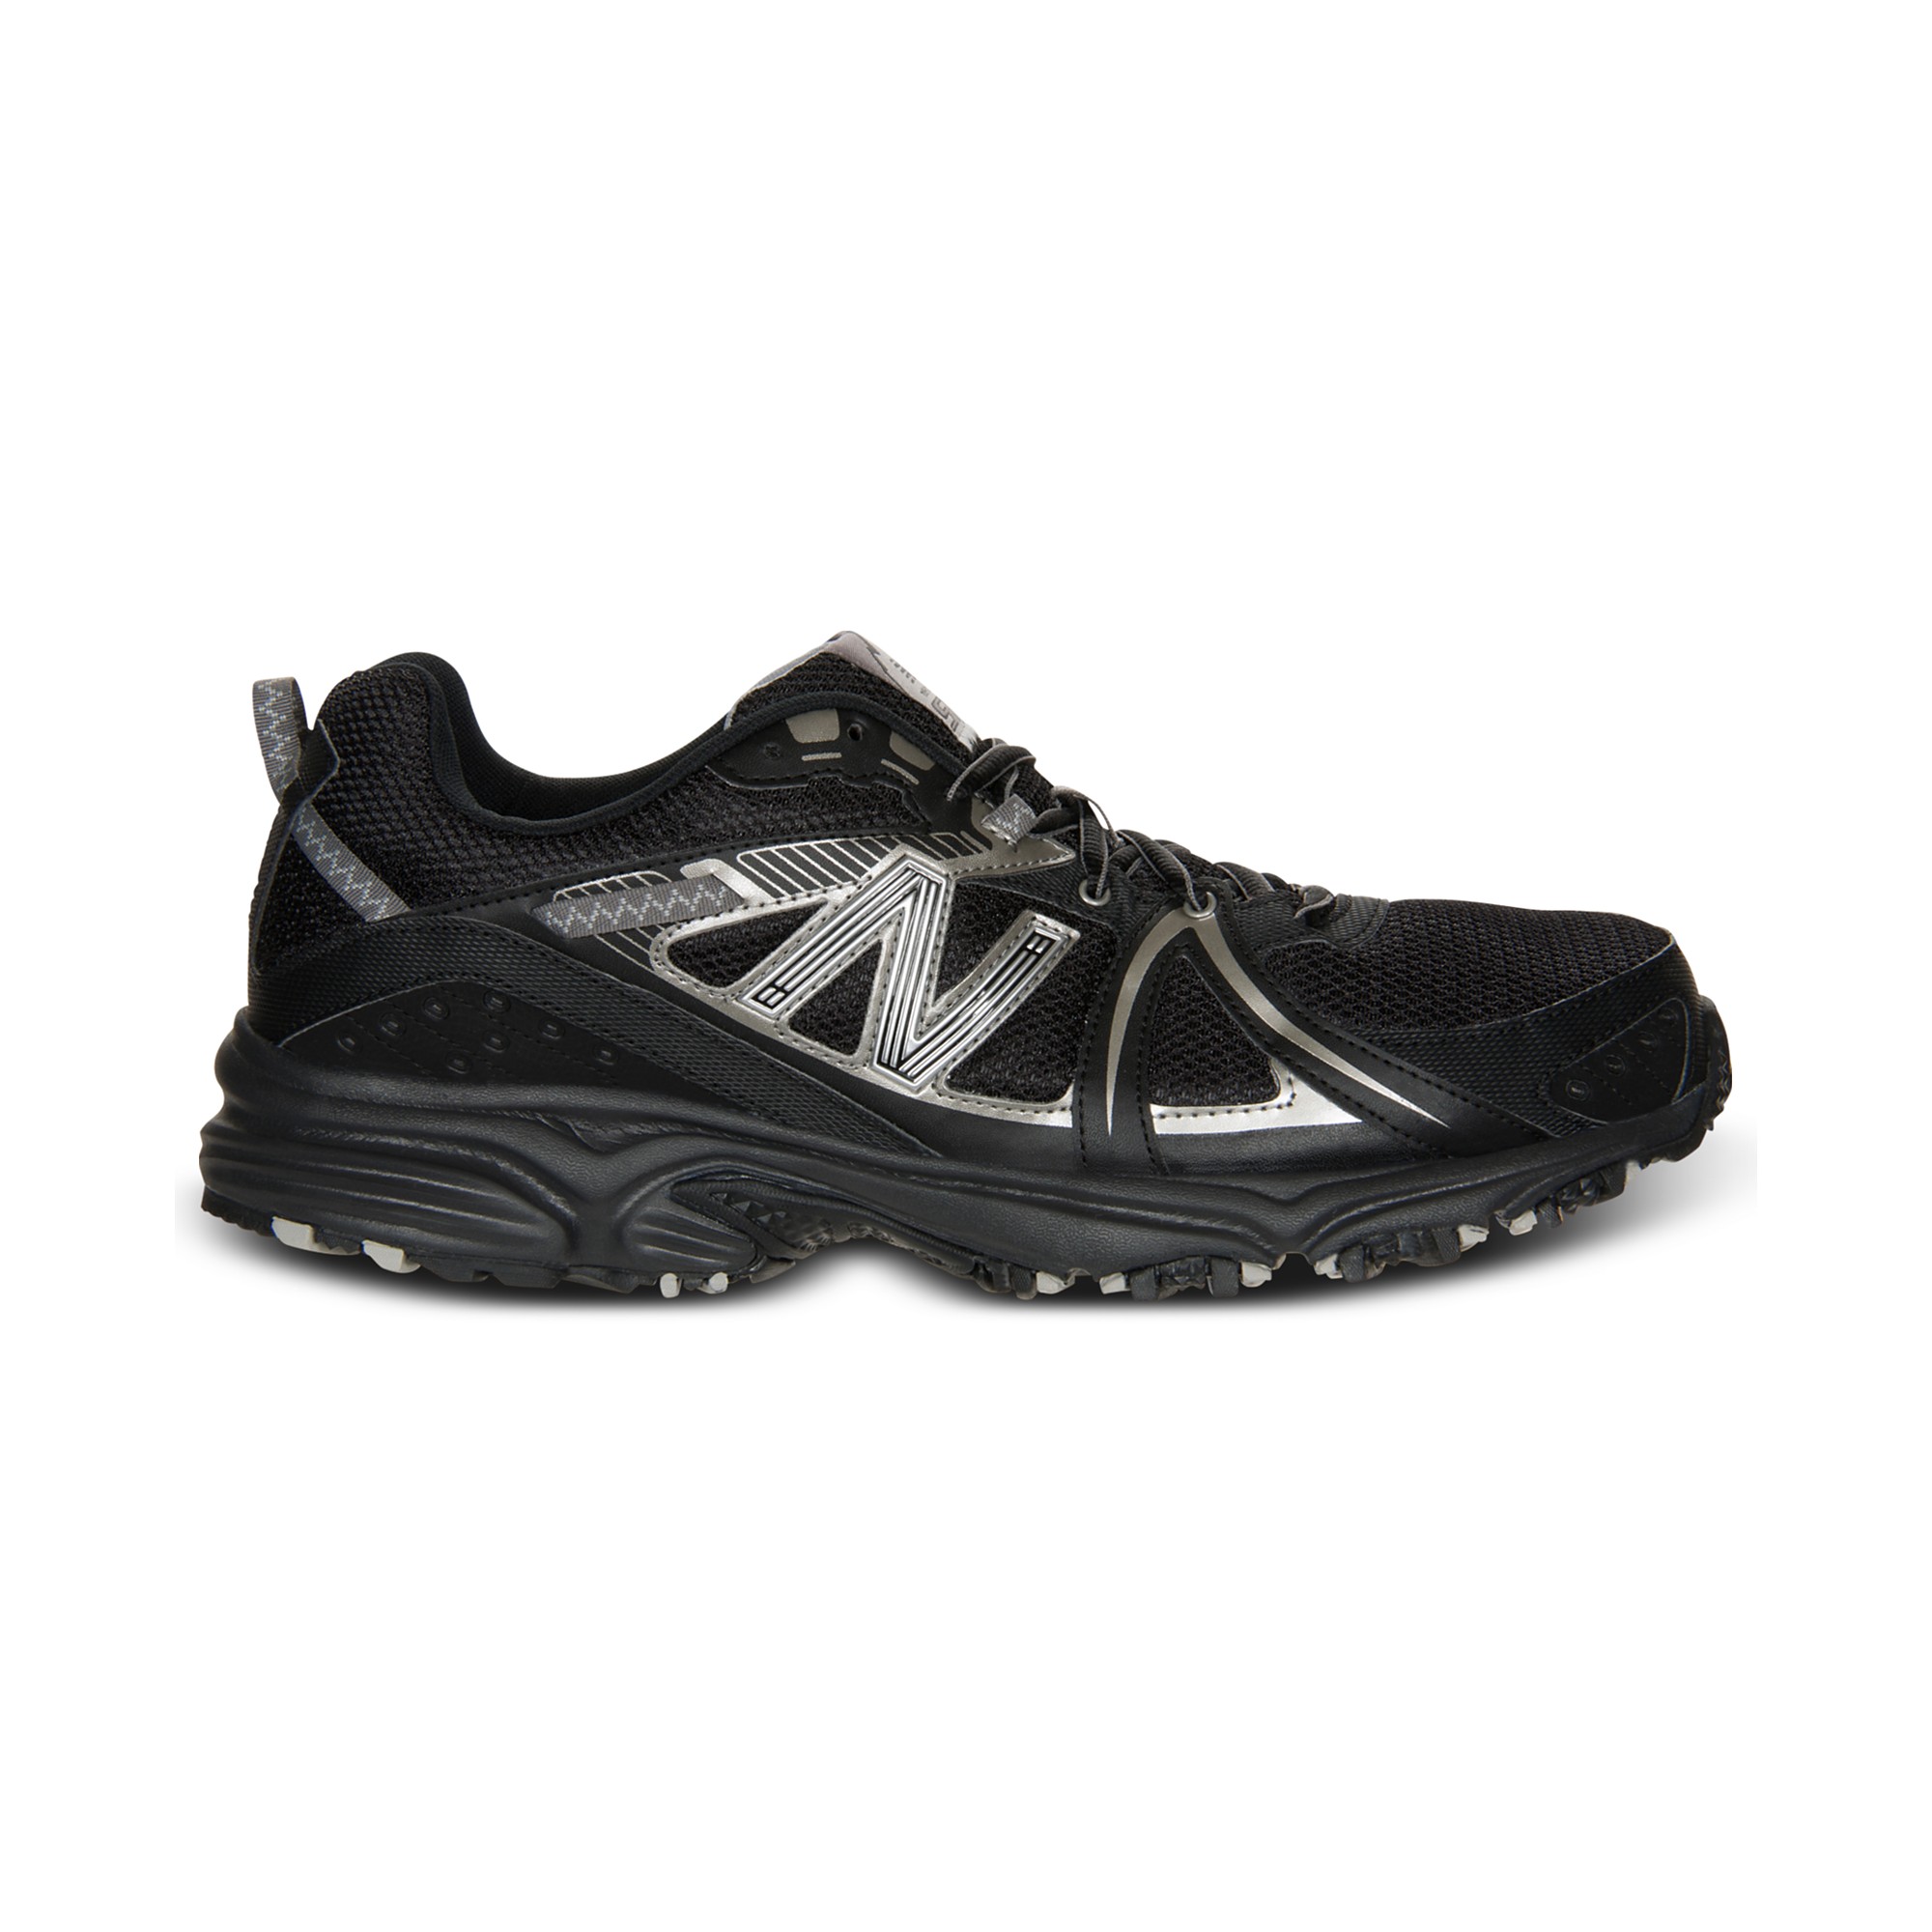 New Balance 510 4e Wide Running Sneakers in Black/Grey (Black) for Men ...